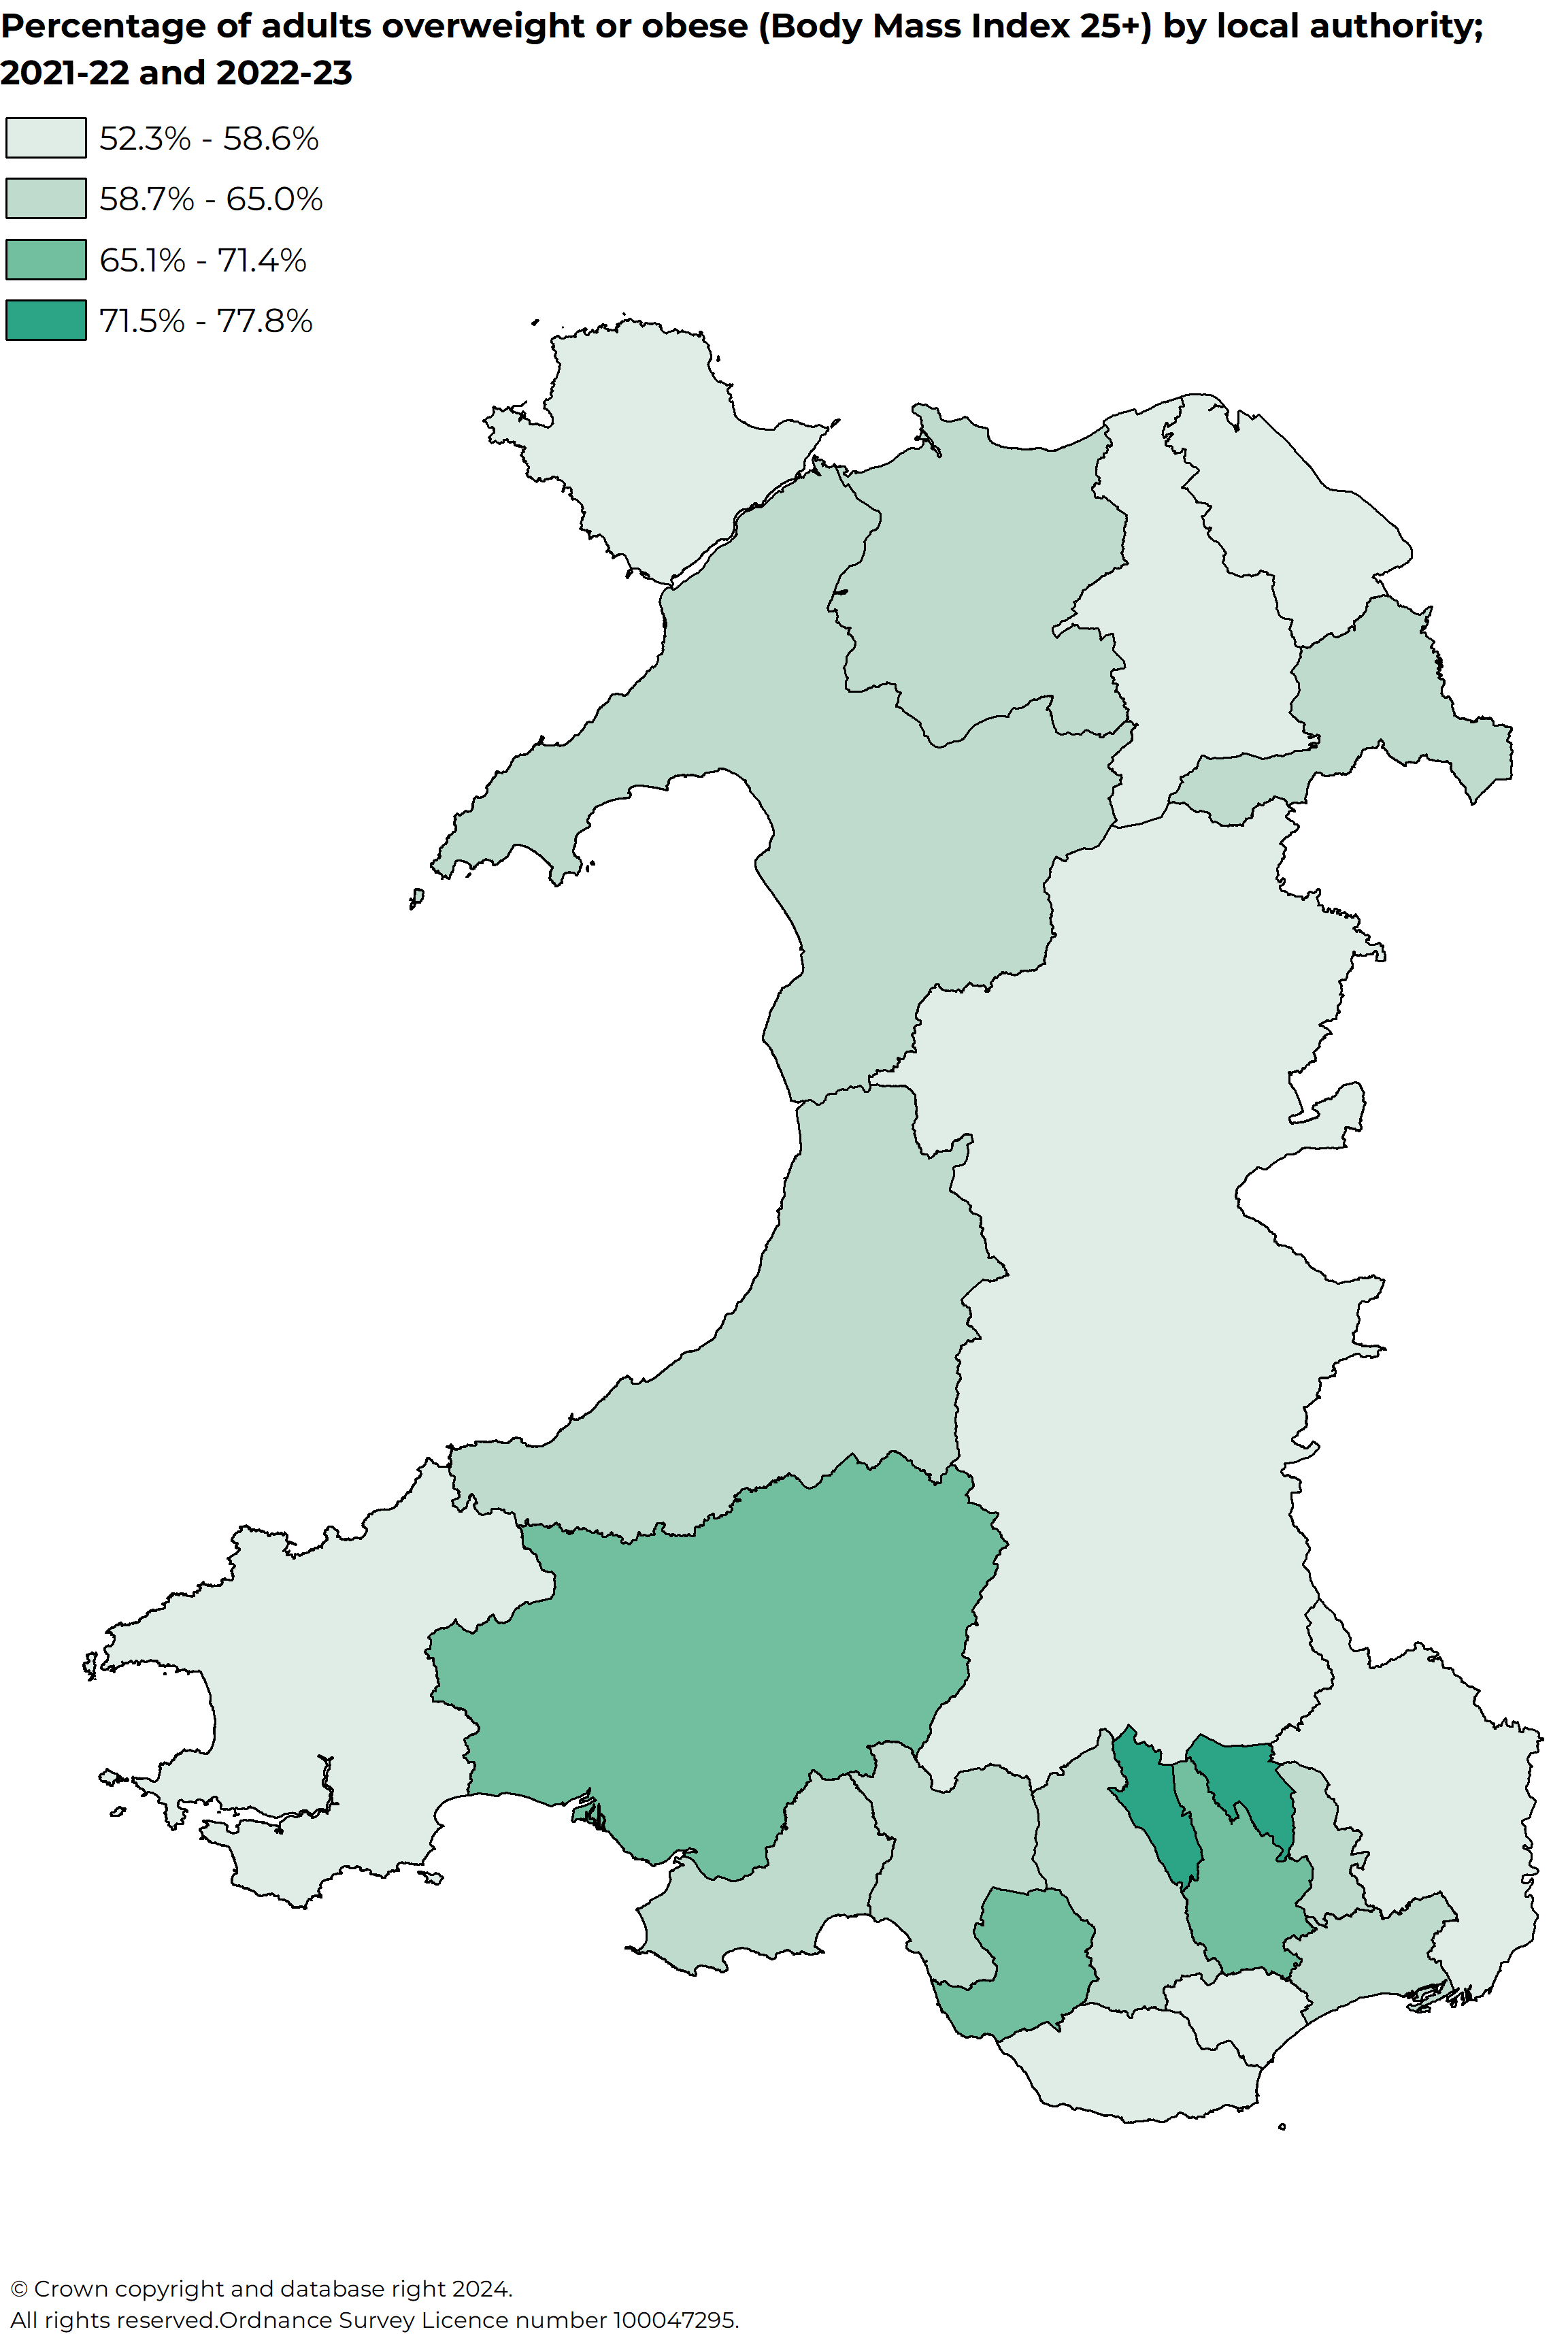 Map which indicates the rates of obesity in different local authority areas across Wales. The map shows that rates are lowest in areas such as Powys and Monmouthshire, and highest in Blaenau Gwent and Merthyr Tydfil, followed by Bridgend and Caerphilly.